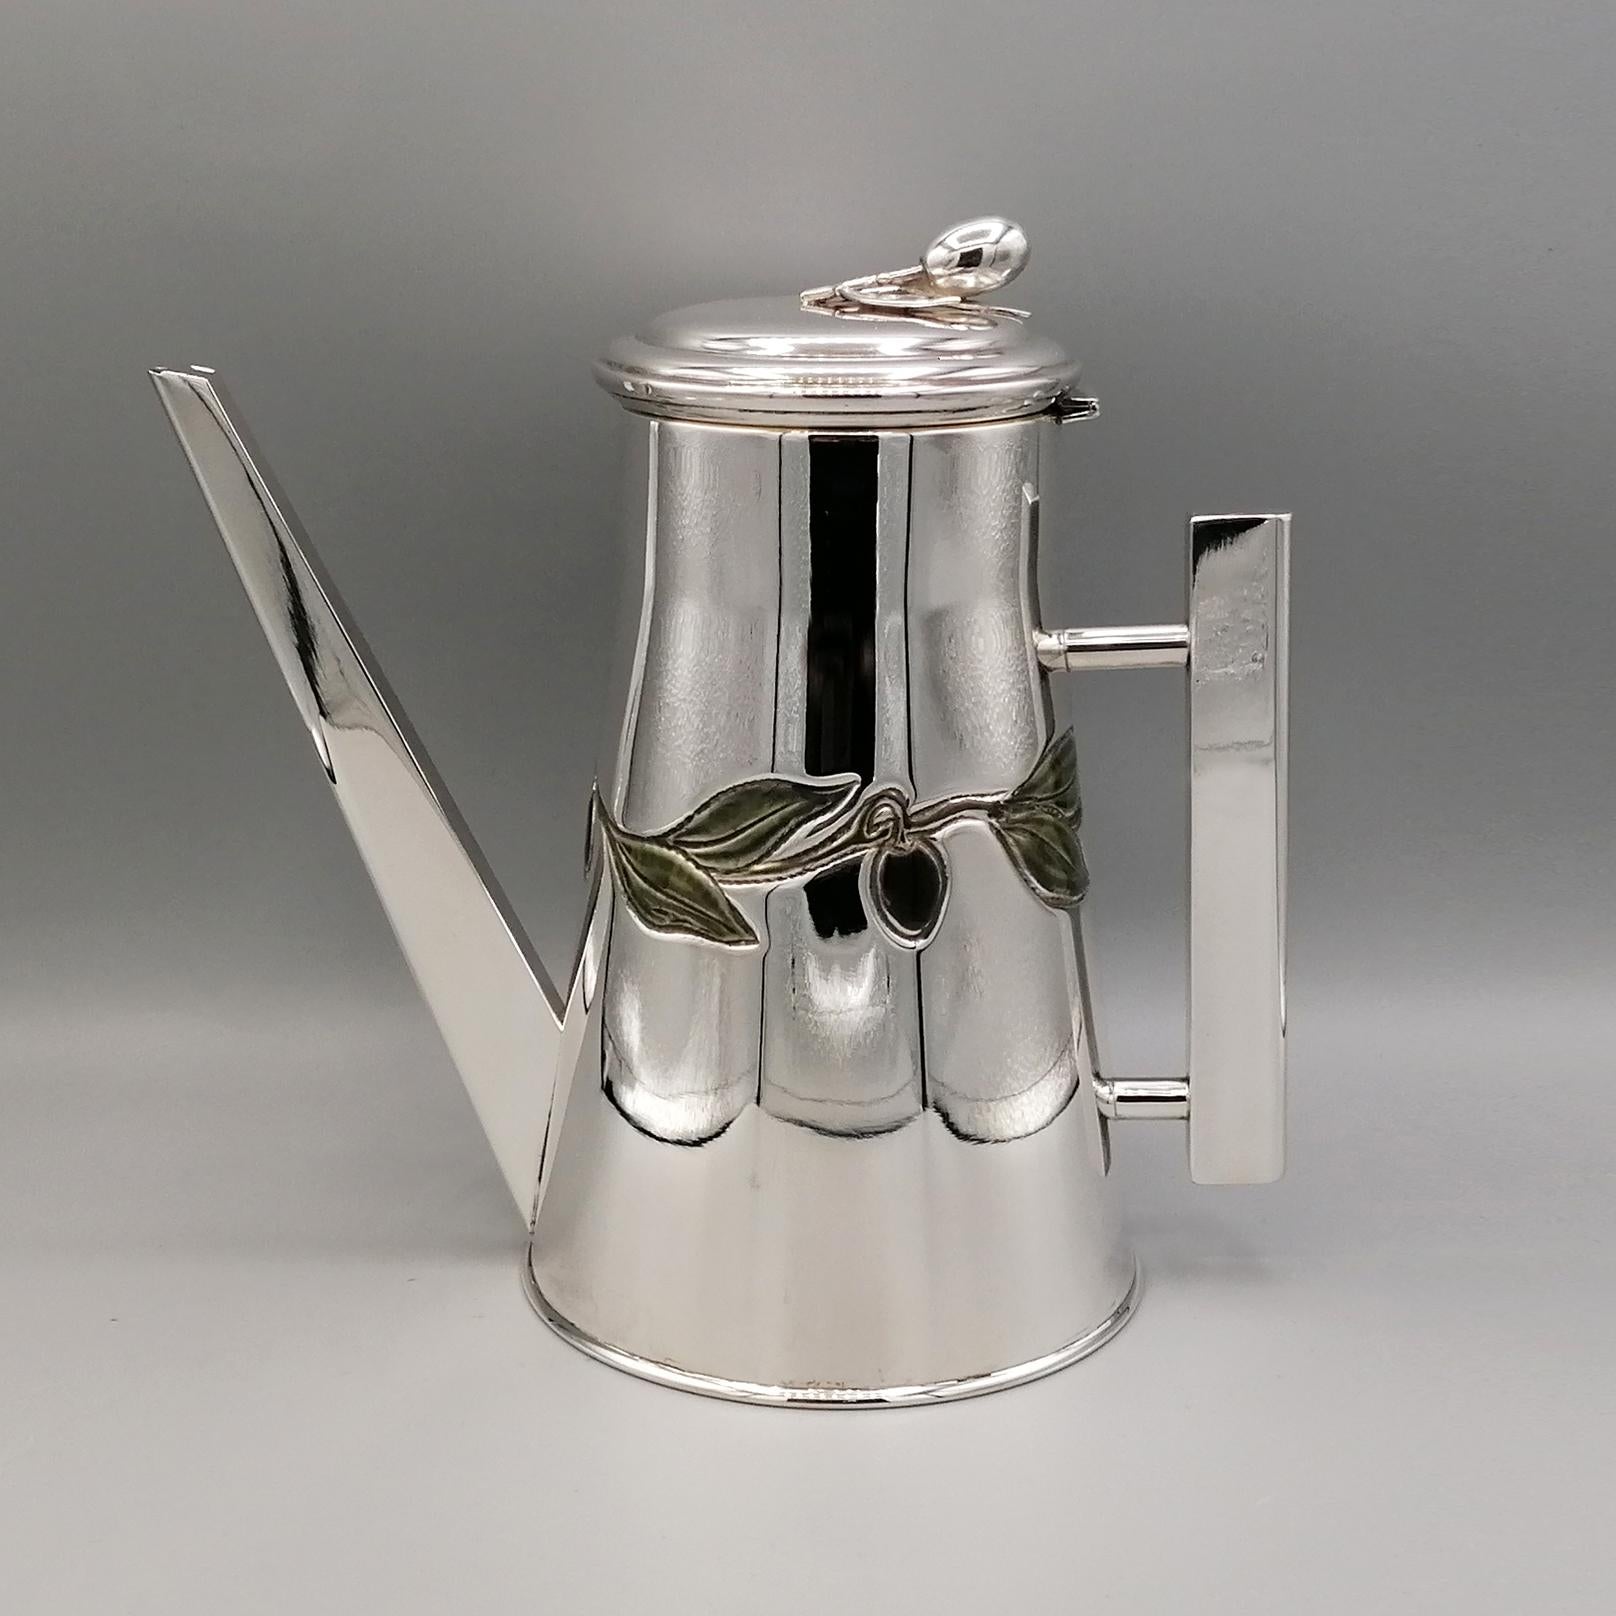 Sterling silver oil cruet.
The conical body of the cruet is smooth and shiny.
In the central part, olives and olive leaves were embossed and subsequently fired enamelled.
The spout and the handle are square in shape making the whole object very